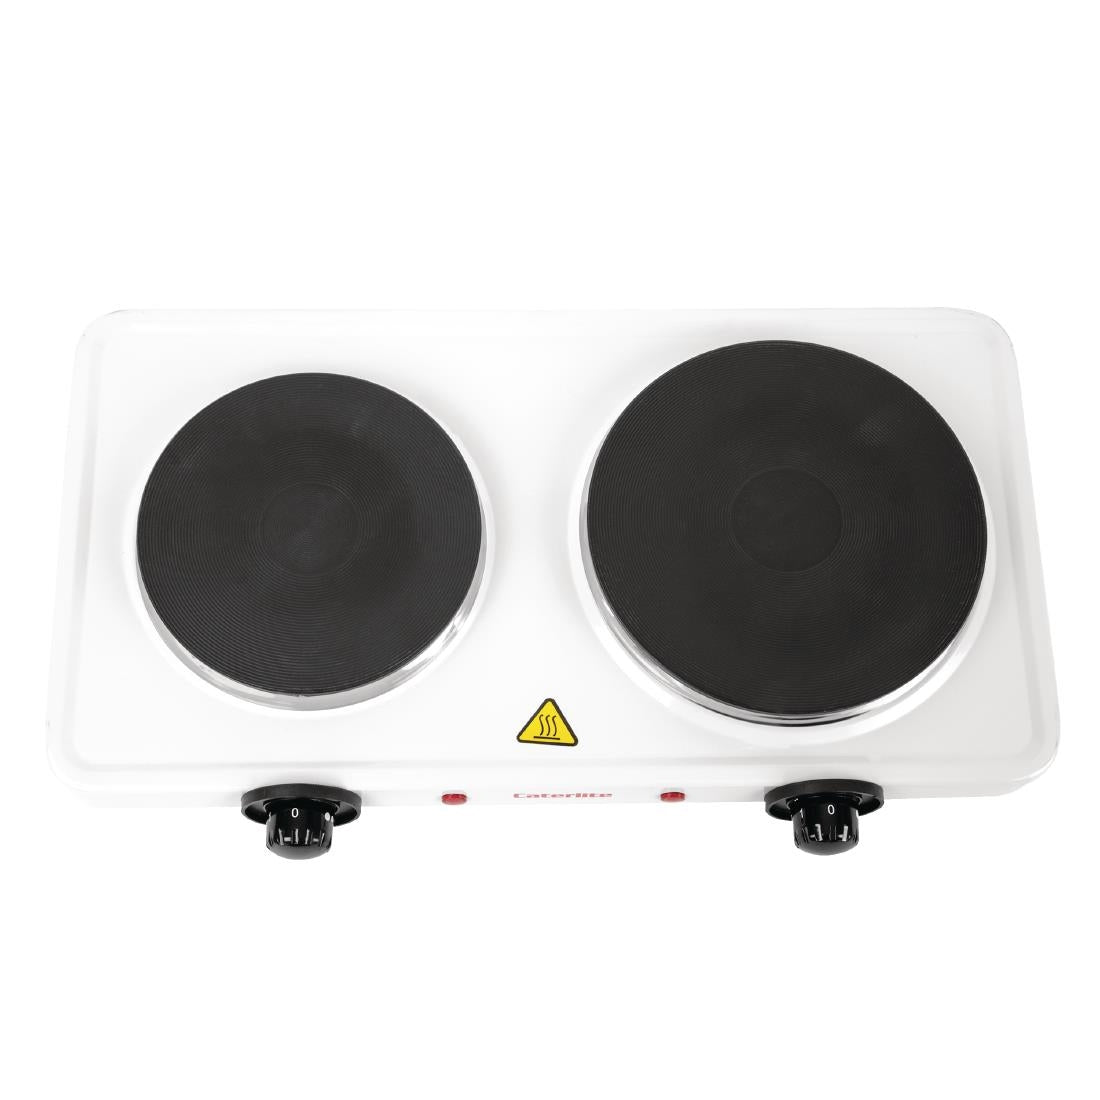 GG567 Caterlite Countertop Boiling Hob Double JD Catering Equipment Solutions Ltd